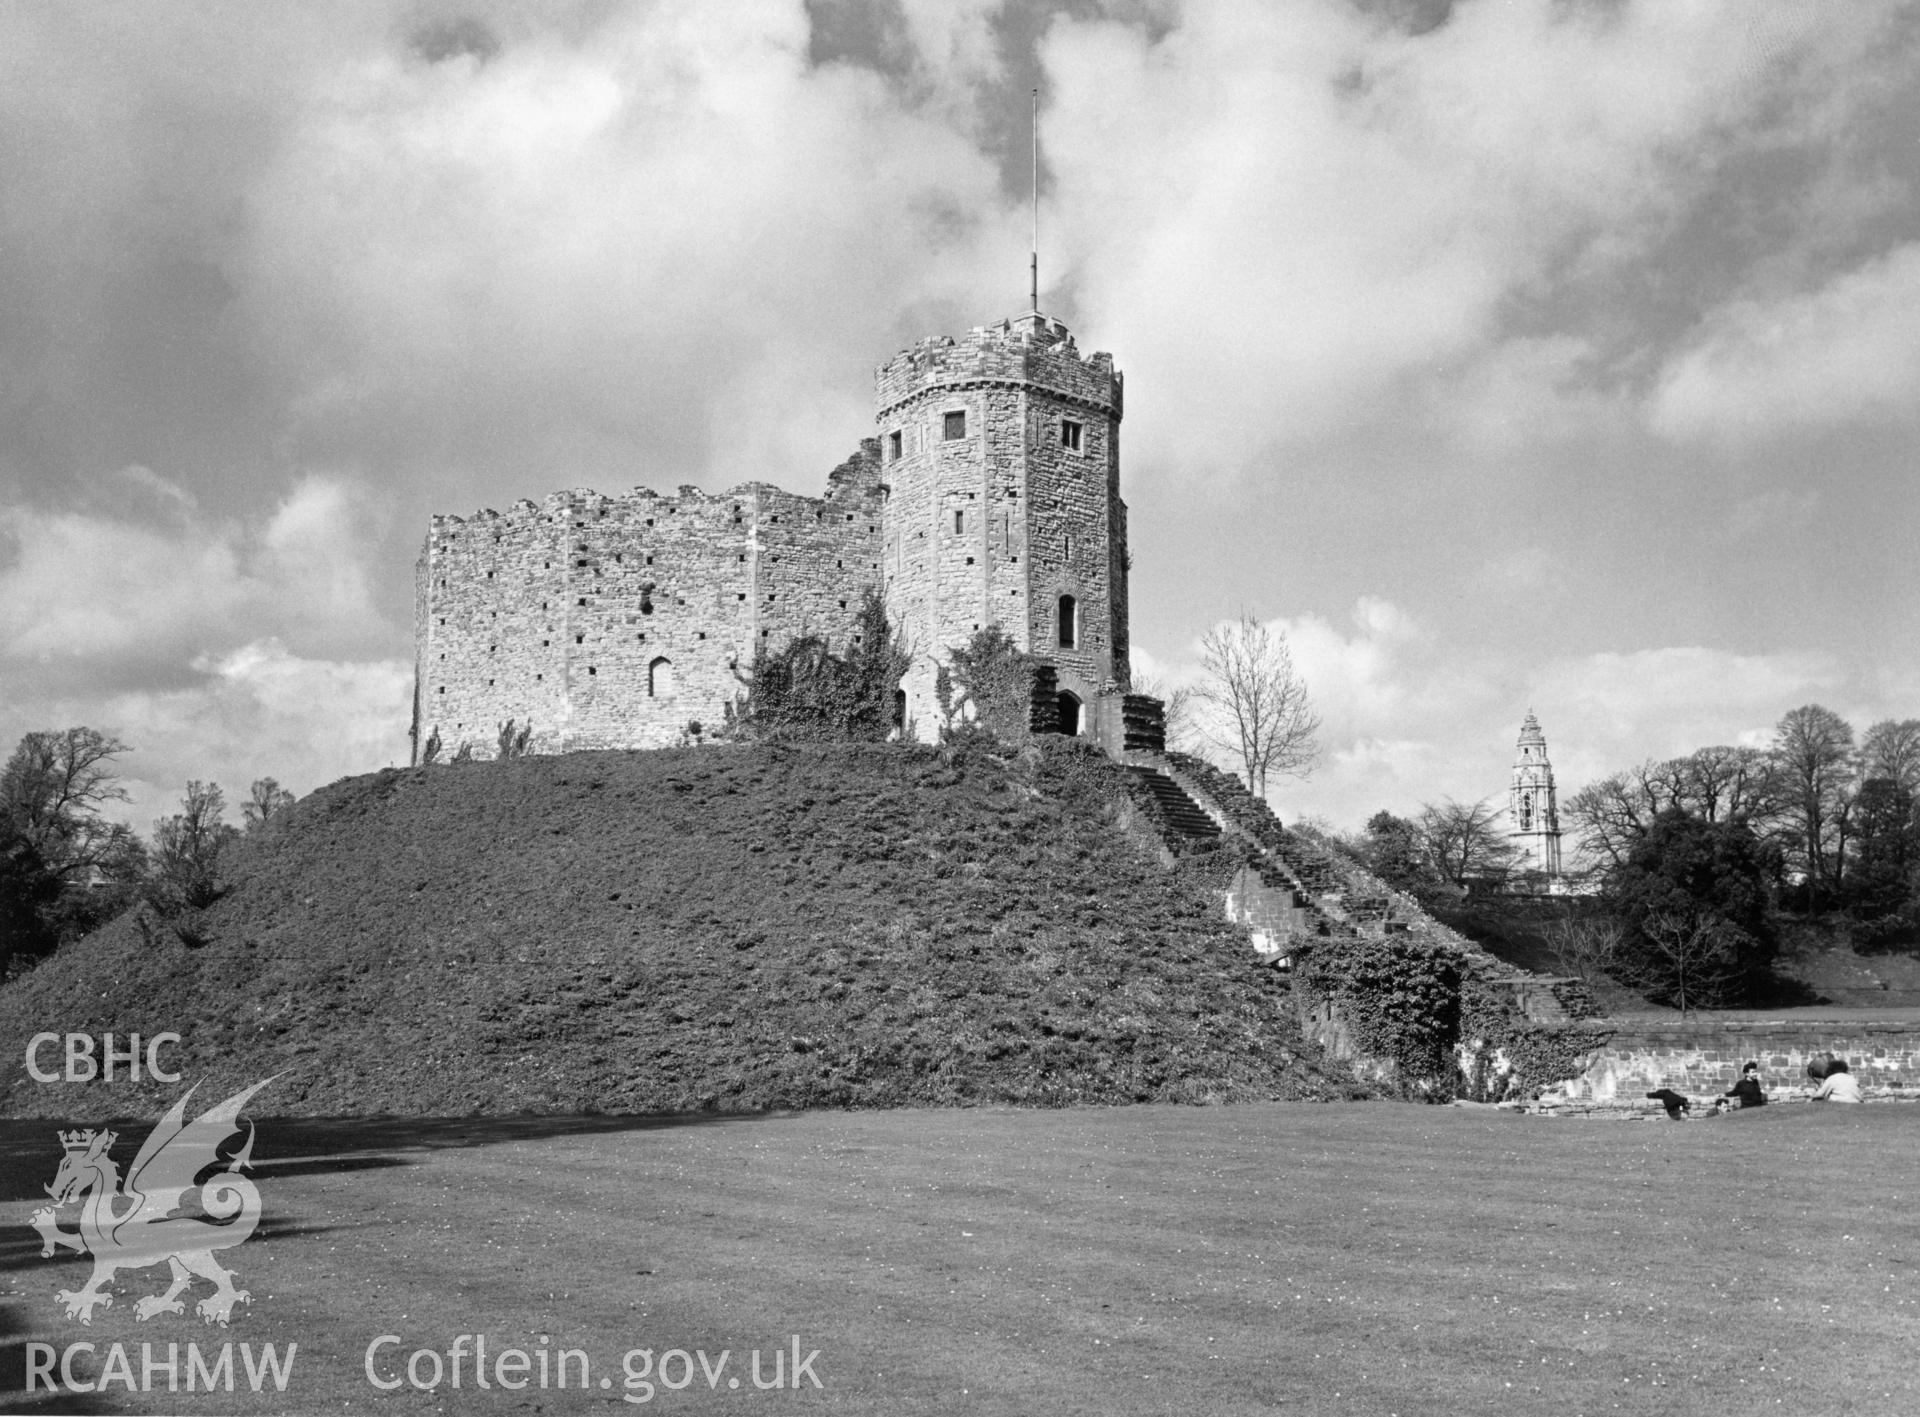 1 b/w print showing view of Cardiff castle keep, collated by the former Central Office of Information.